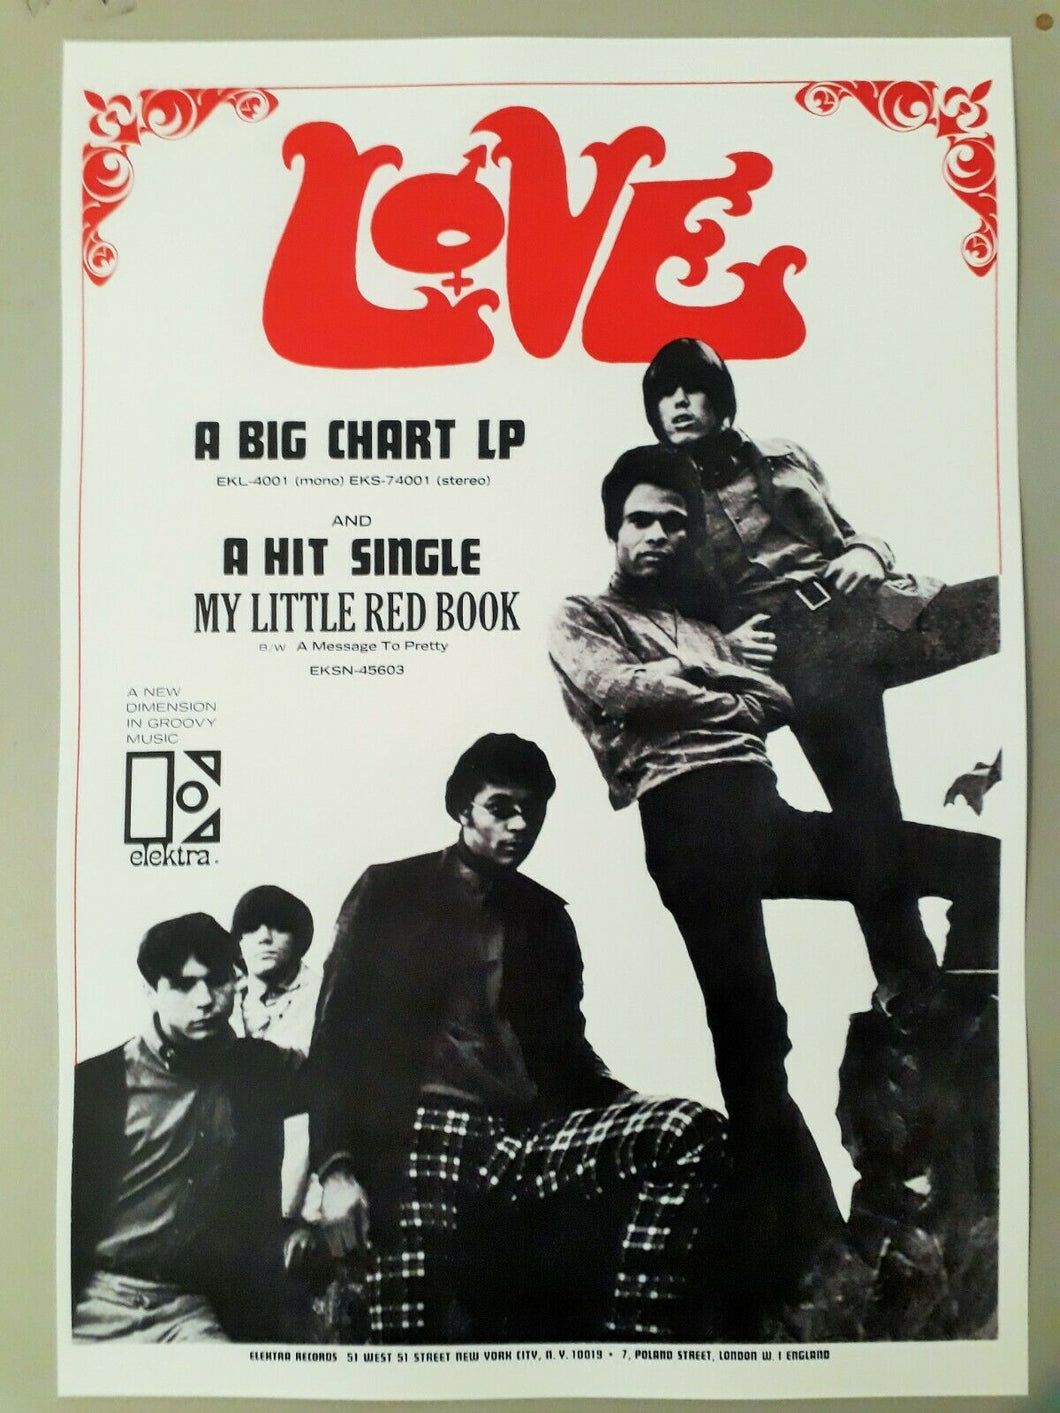 Love promo poster - My Little Red Book Elektra records 1966 new reprinted edition - Original Music and Movie Posters for sale from Bamalama - Online Poster Store UK London